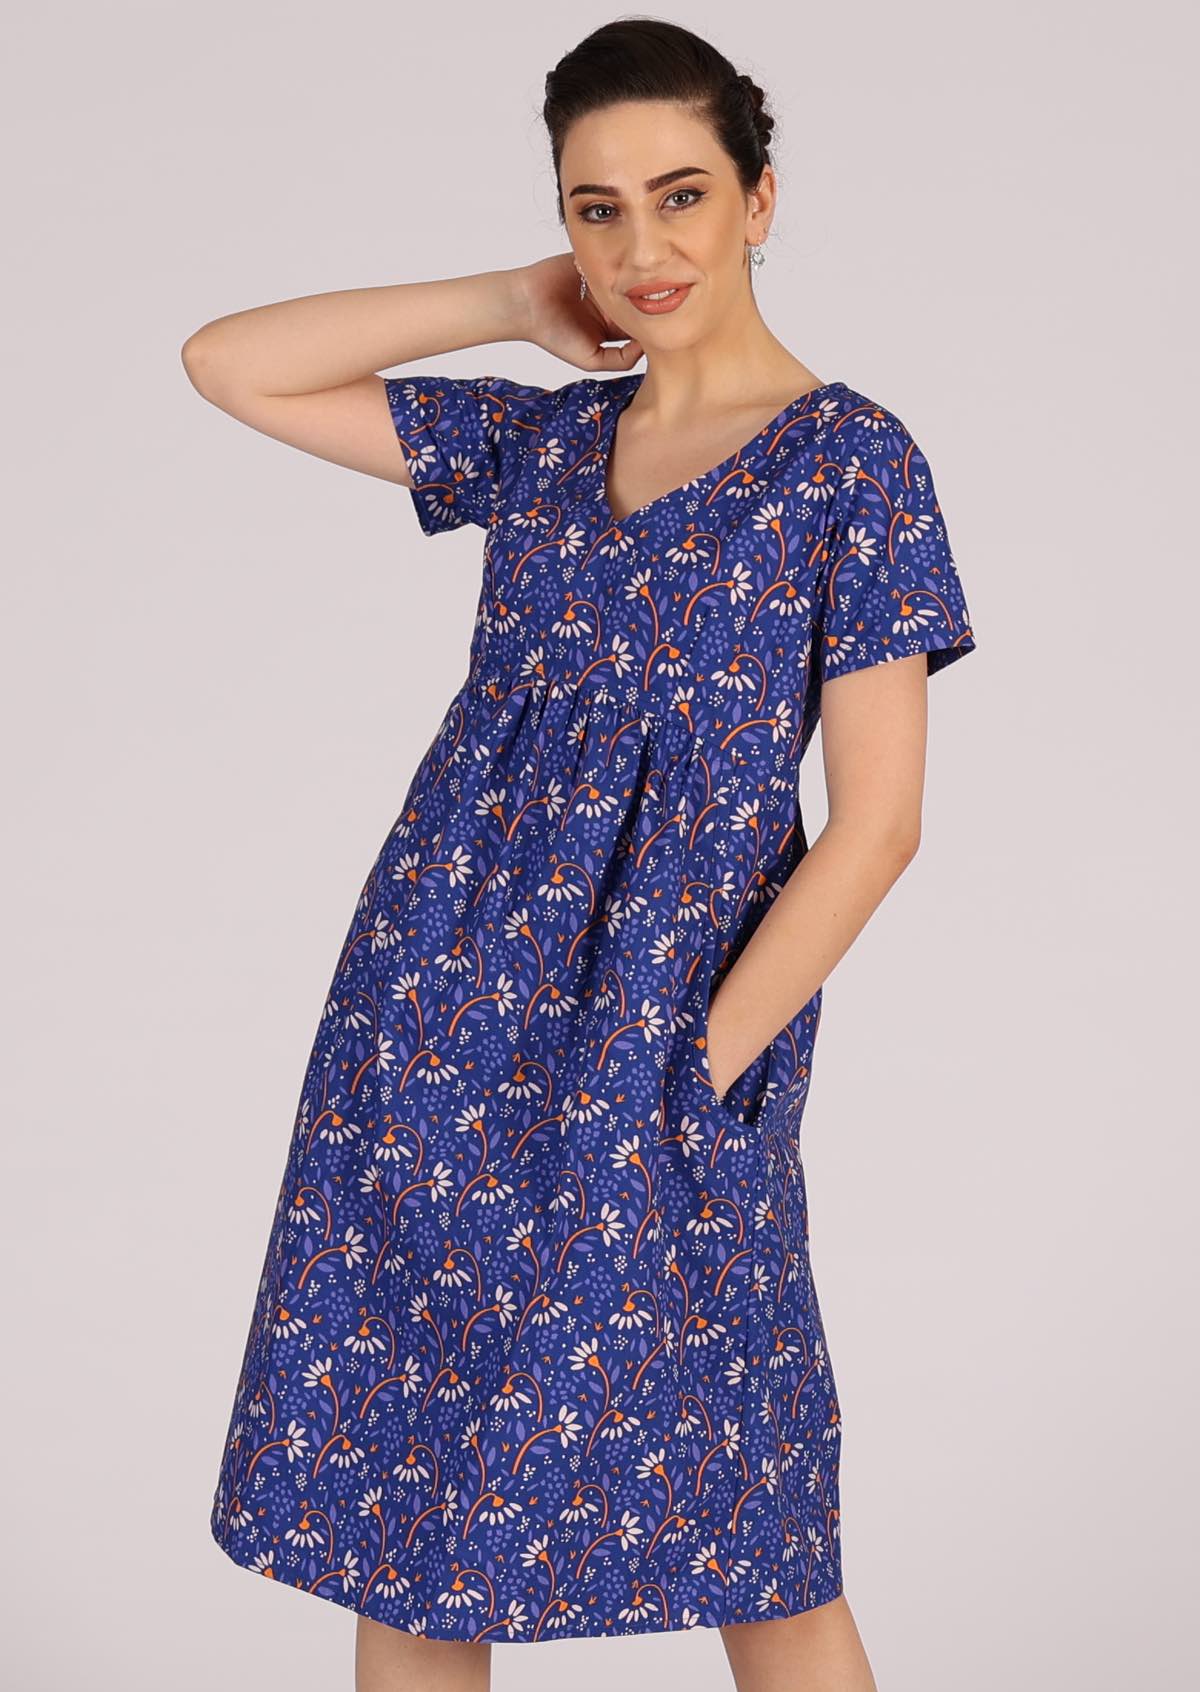 Smiling model wears blue based cotton dress with white and orange florals. 